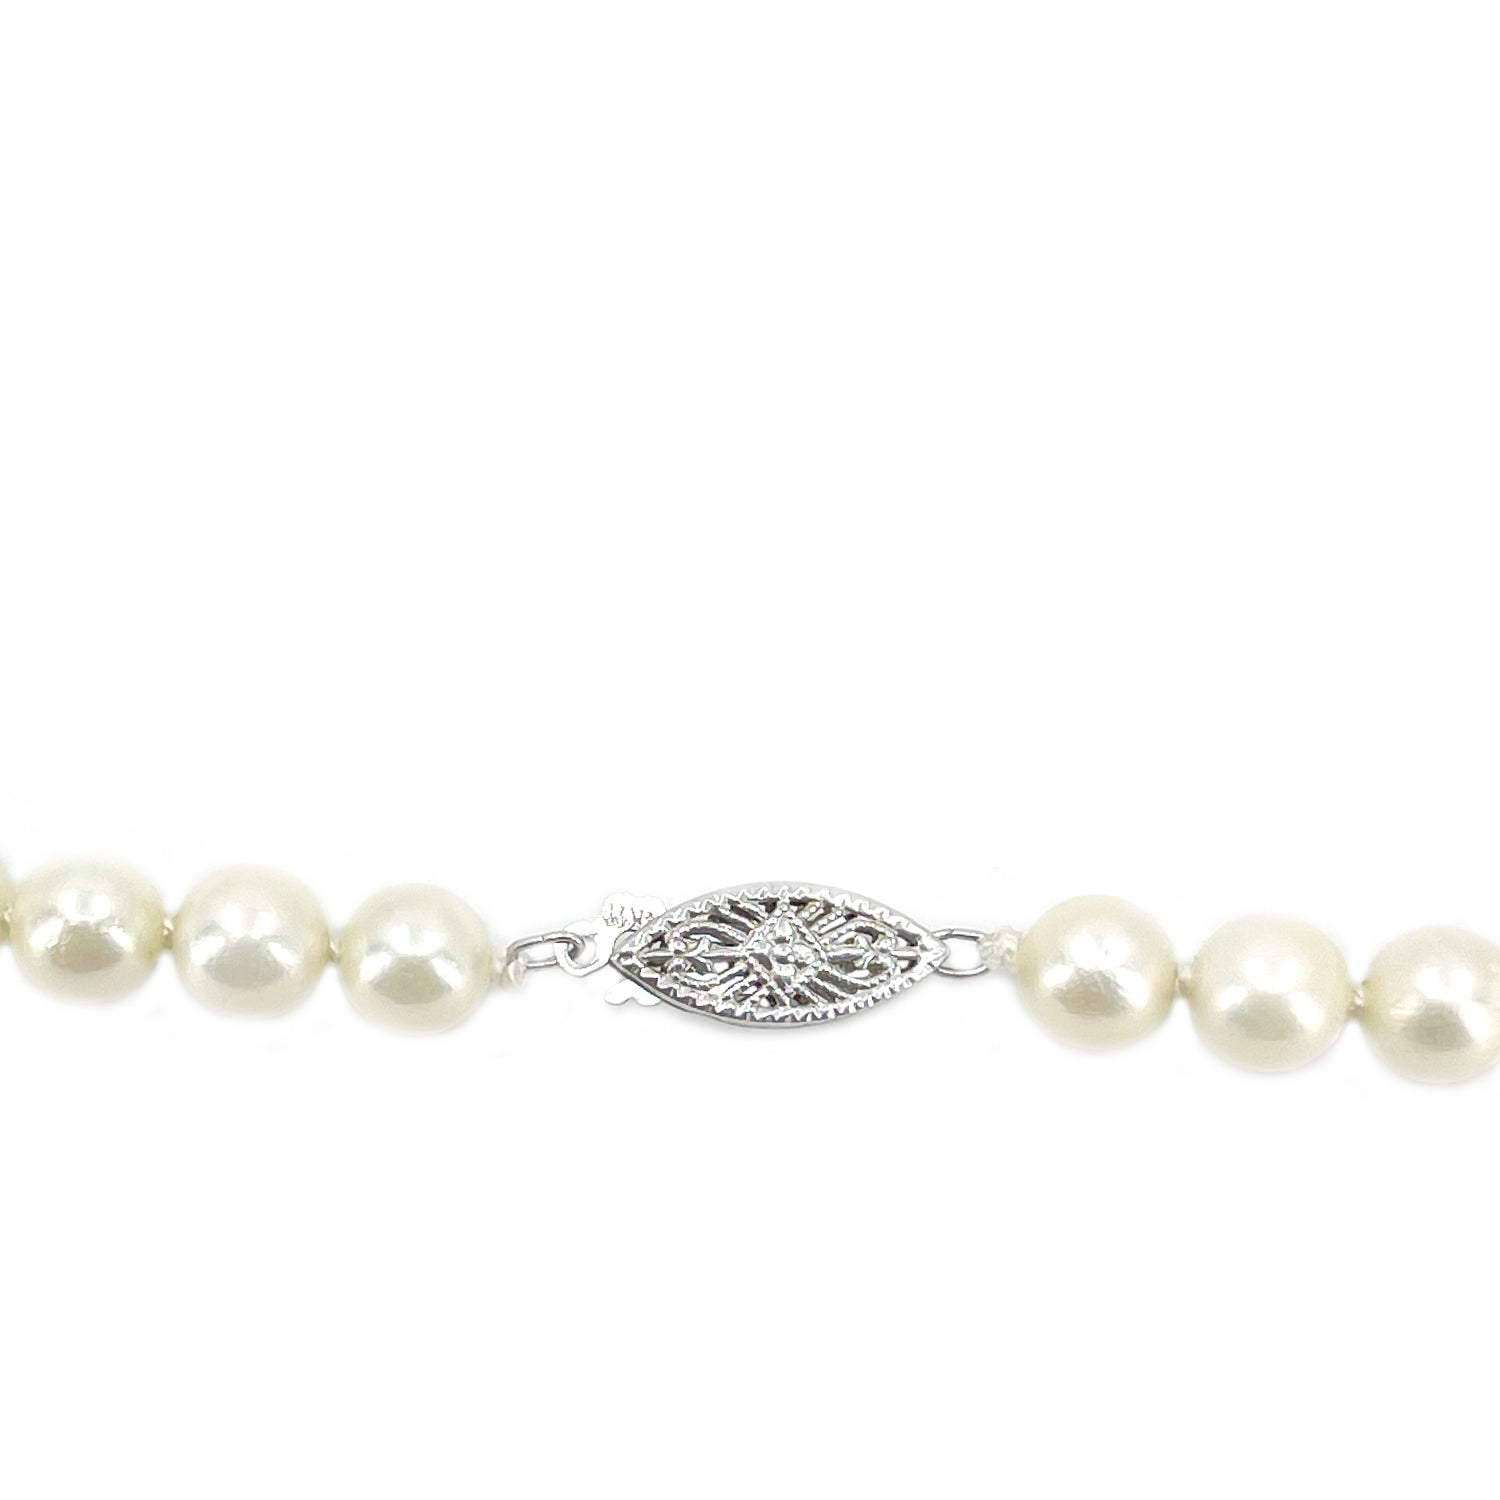 Filigree Retro Japanese Saltwater Cultured Akoya Pearl Vintage Necklace - 14K White Gold 23.50 Inch